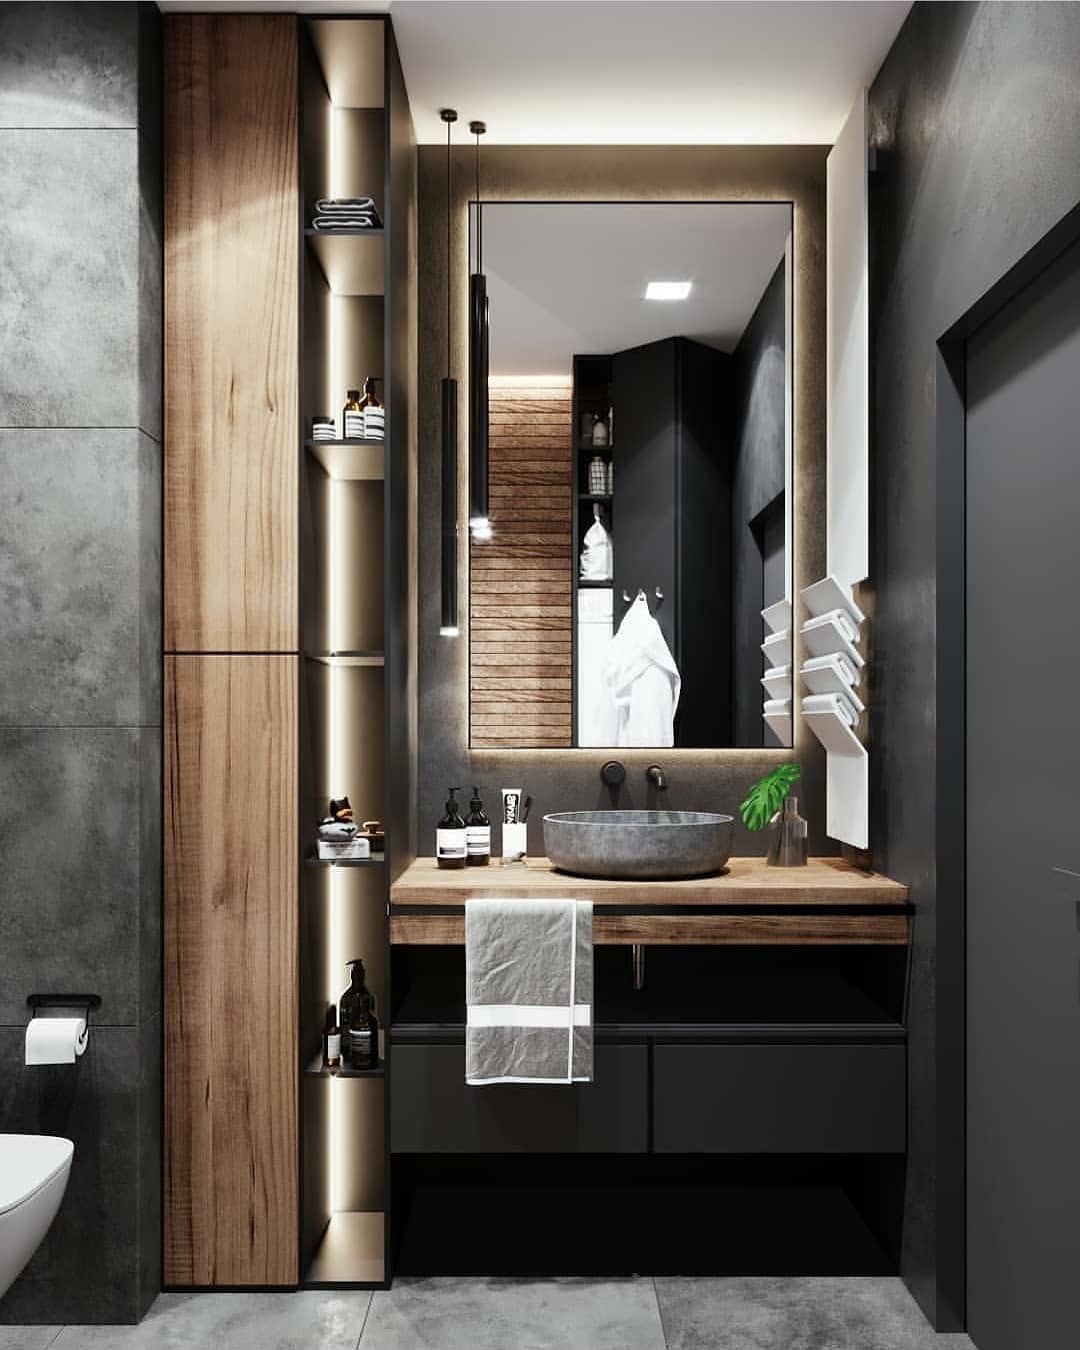 HOME DECOR & DESIGN on Instagram: “Swipe left! Would you take a shower in here? рџ?Ќ This bathroom combines dark colors, such as black and grey with an wooden interior design.…” -   14 home accessories Grey interior design ideas